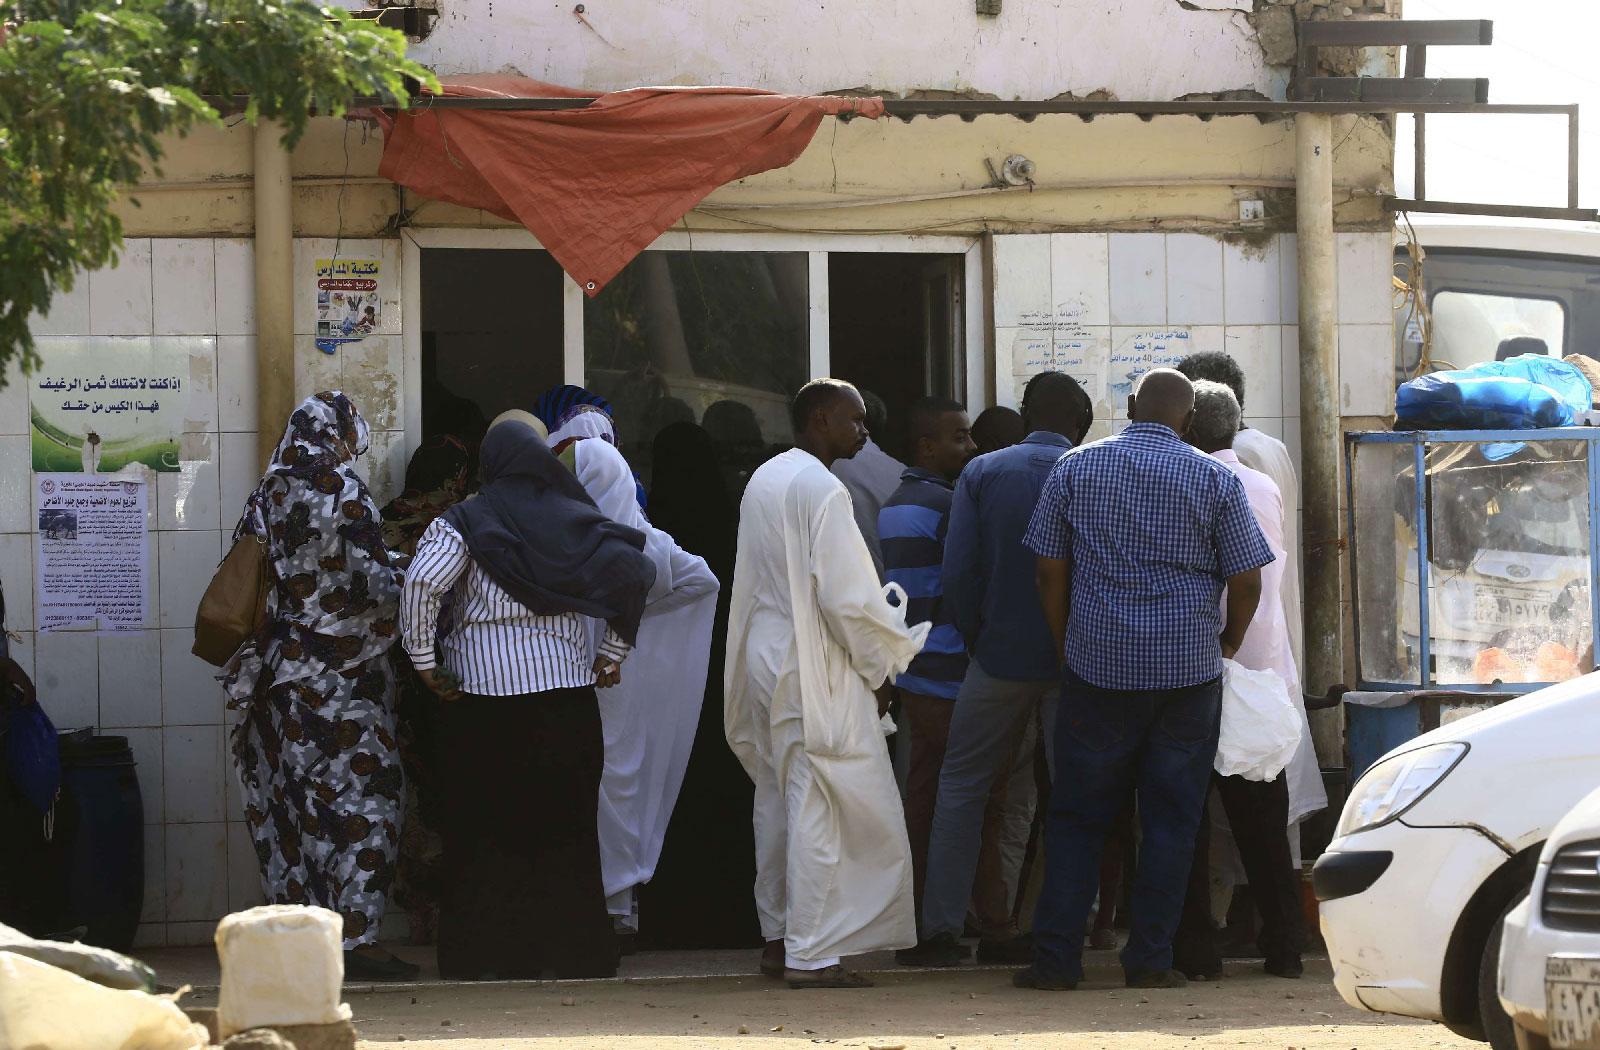 People queue in front of a bakery in the Sudanese capital Khartoum on August 26, 2018.